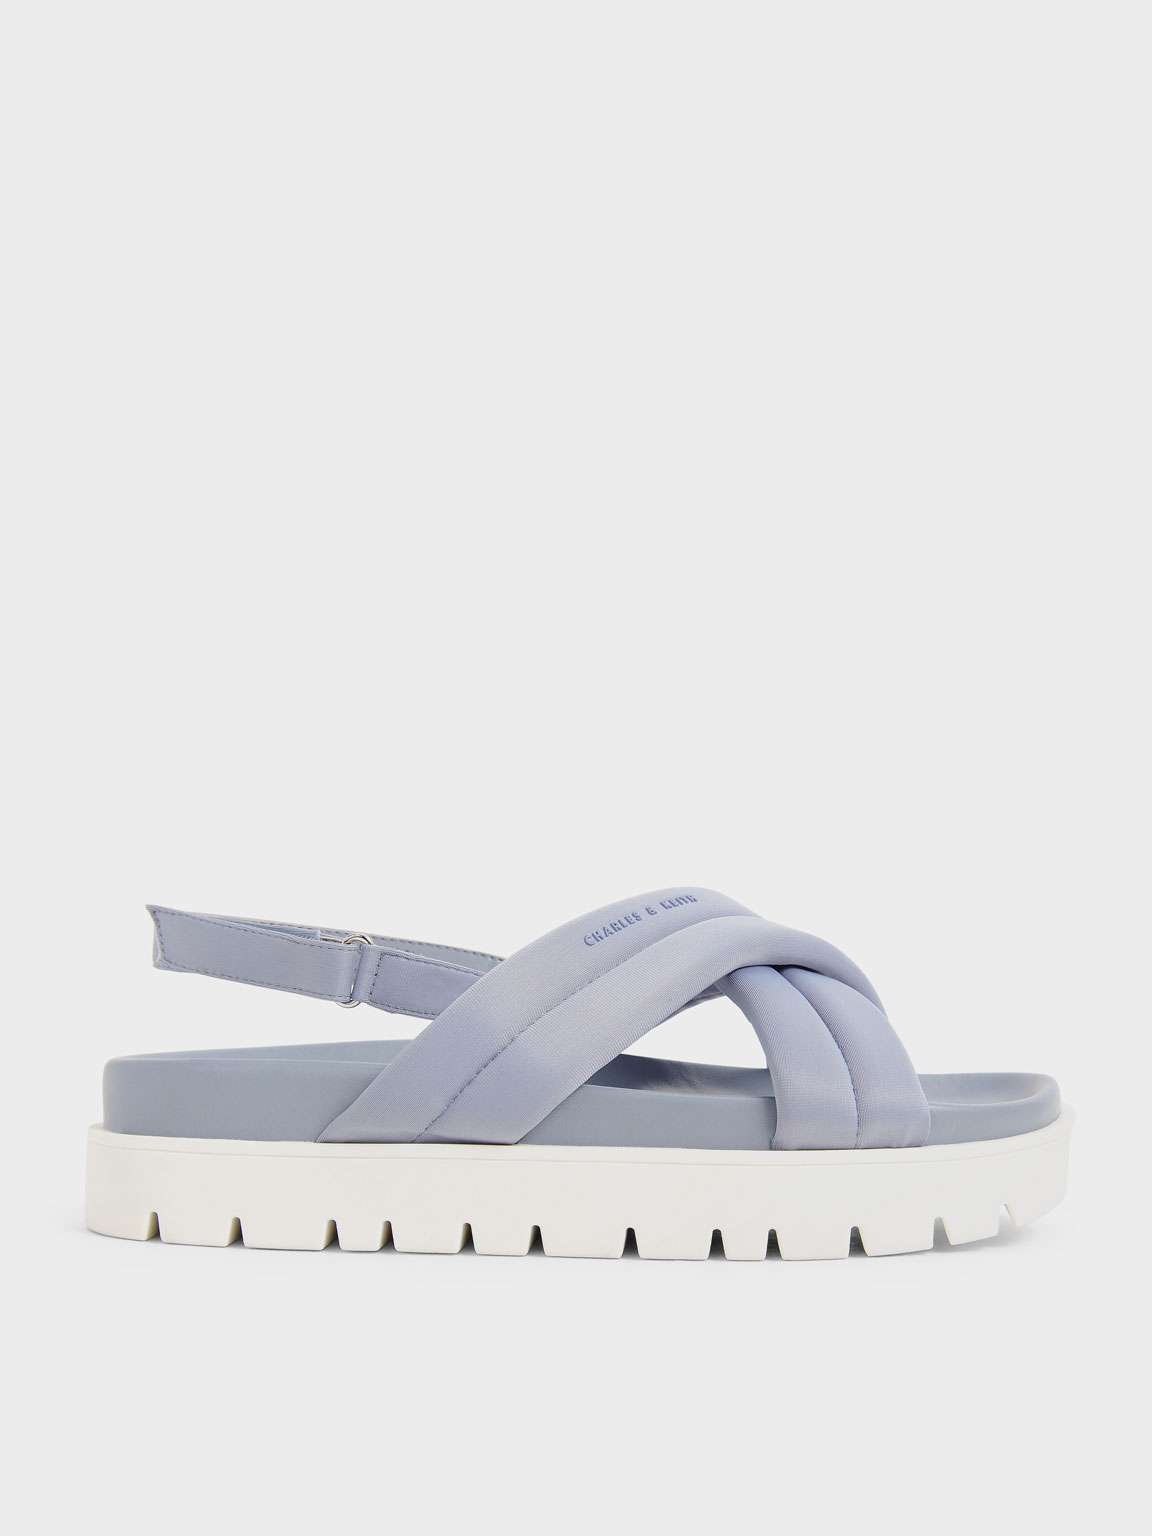 Light Blue Recycled Polyester Padded Sports Sandals - CHARLES & KEITH ID